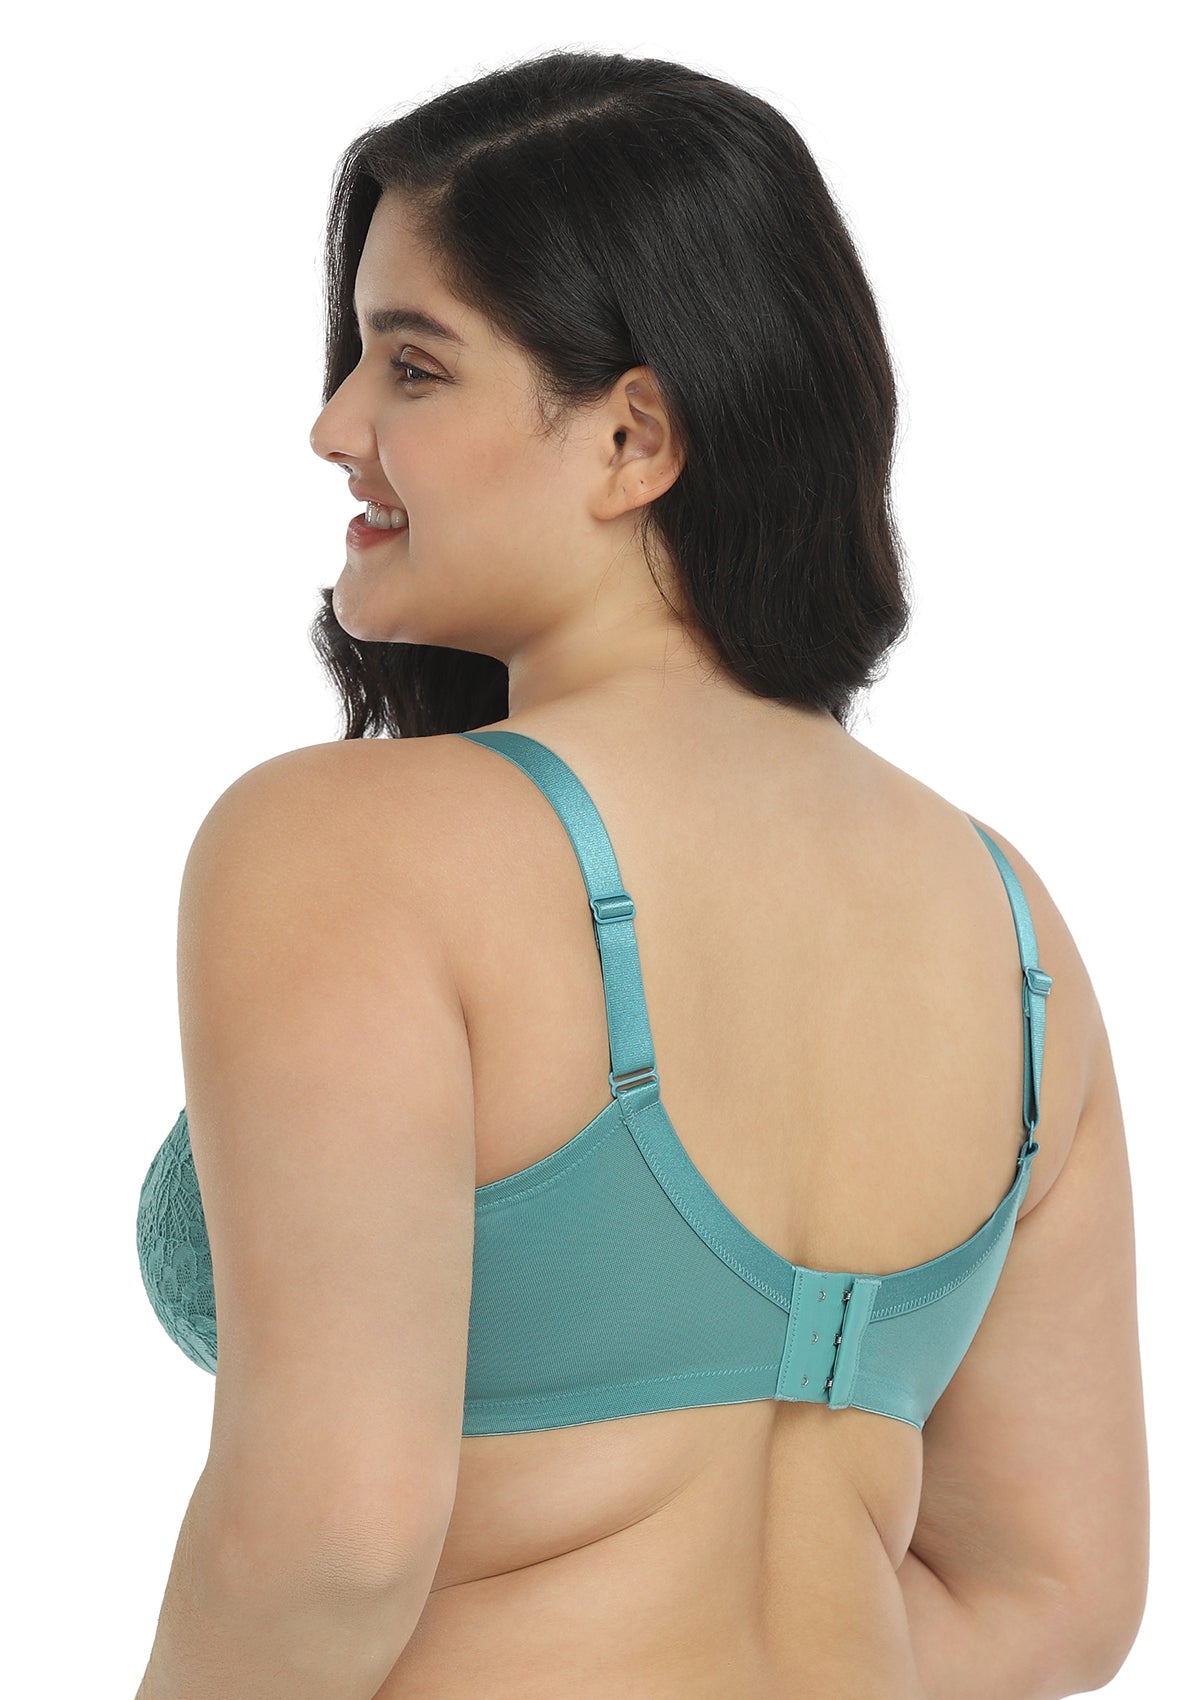 HSIA Paeonia Lace Full Coverage Underwire Non-Padded Uplifting Bra - Teal / 38 / DD/E